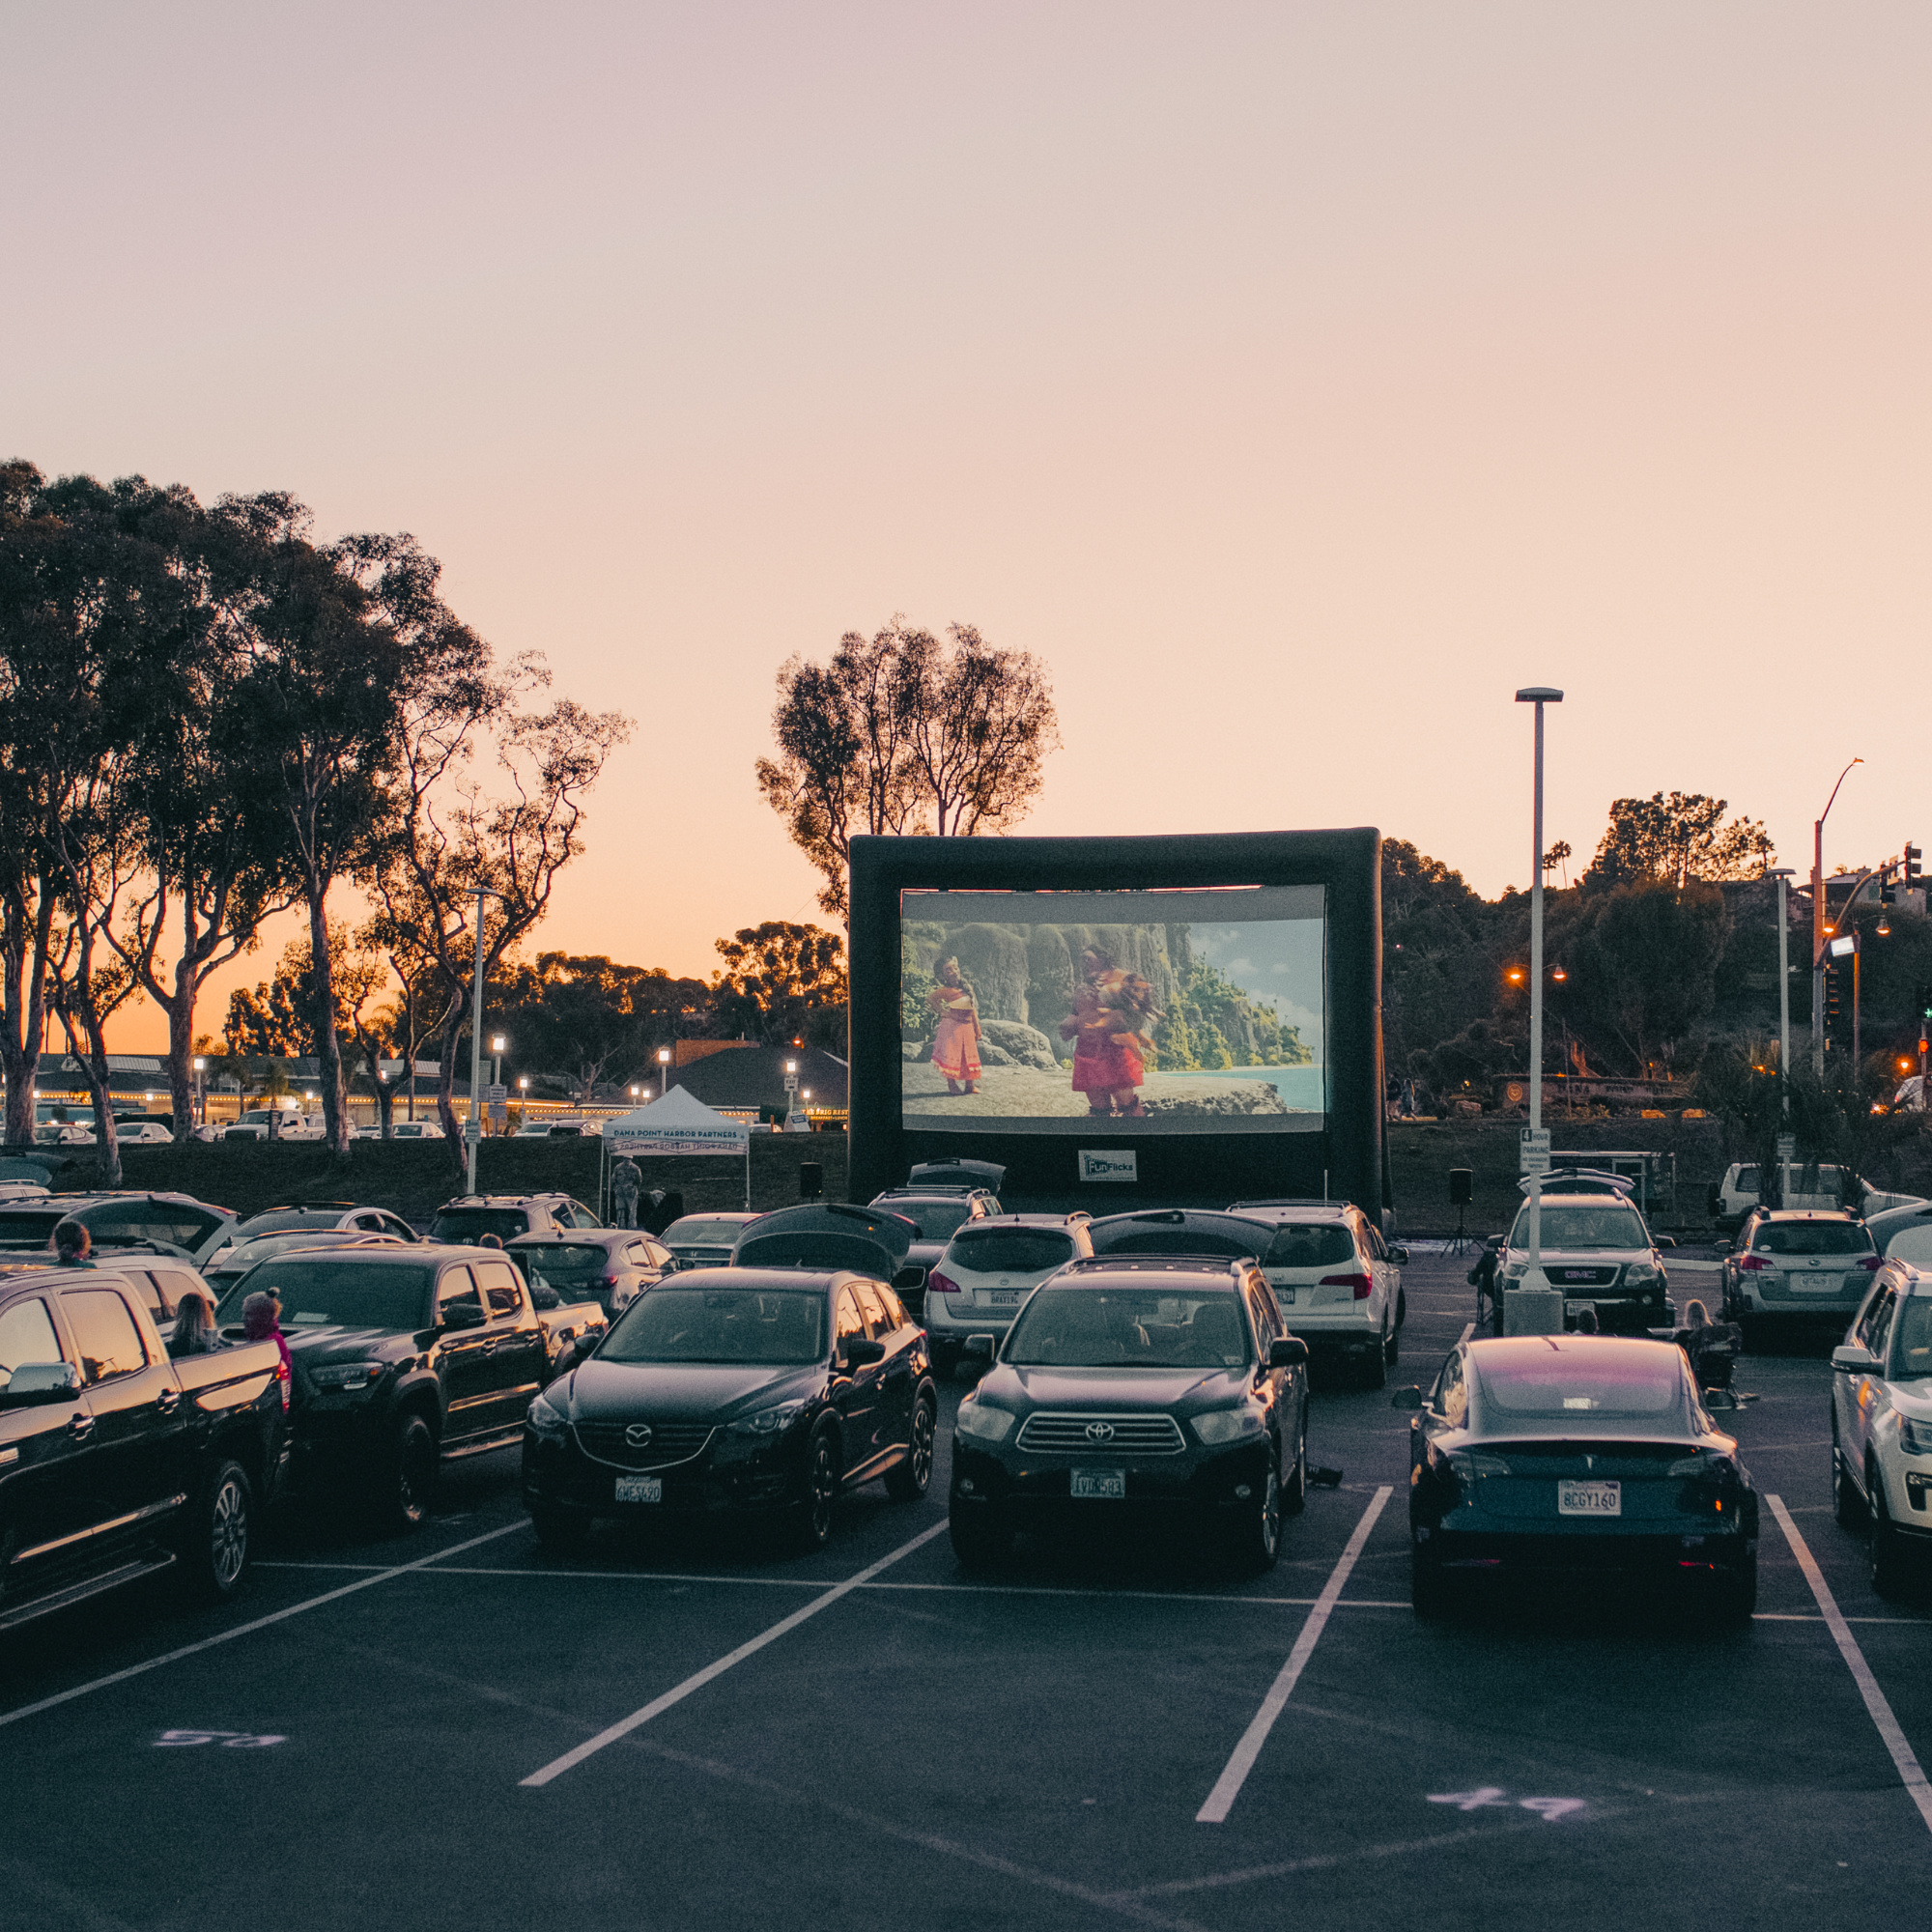 Huge FunFlicks® inflatable movie screen at a drive-in